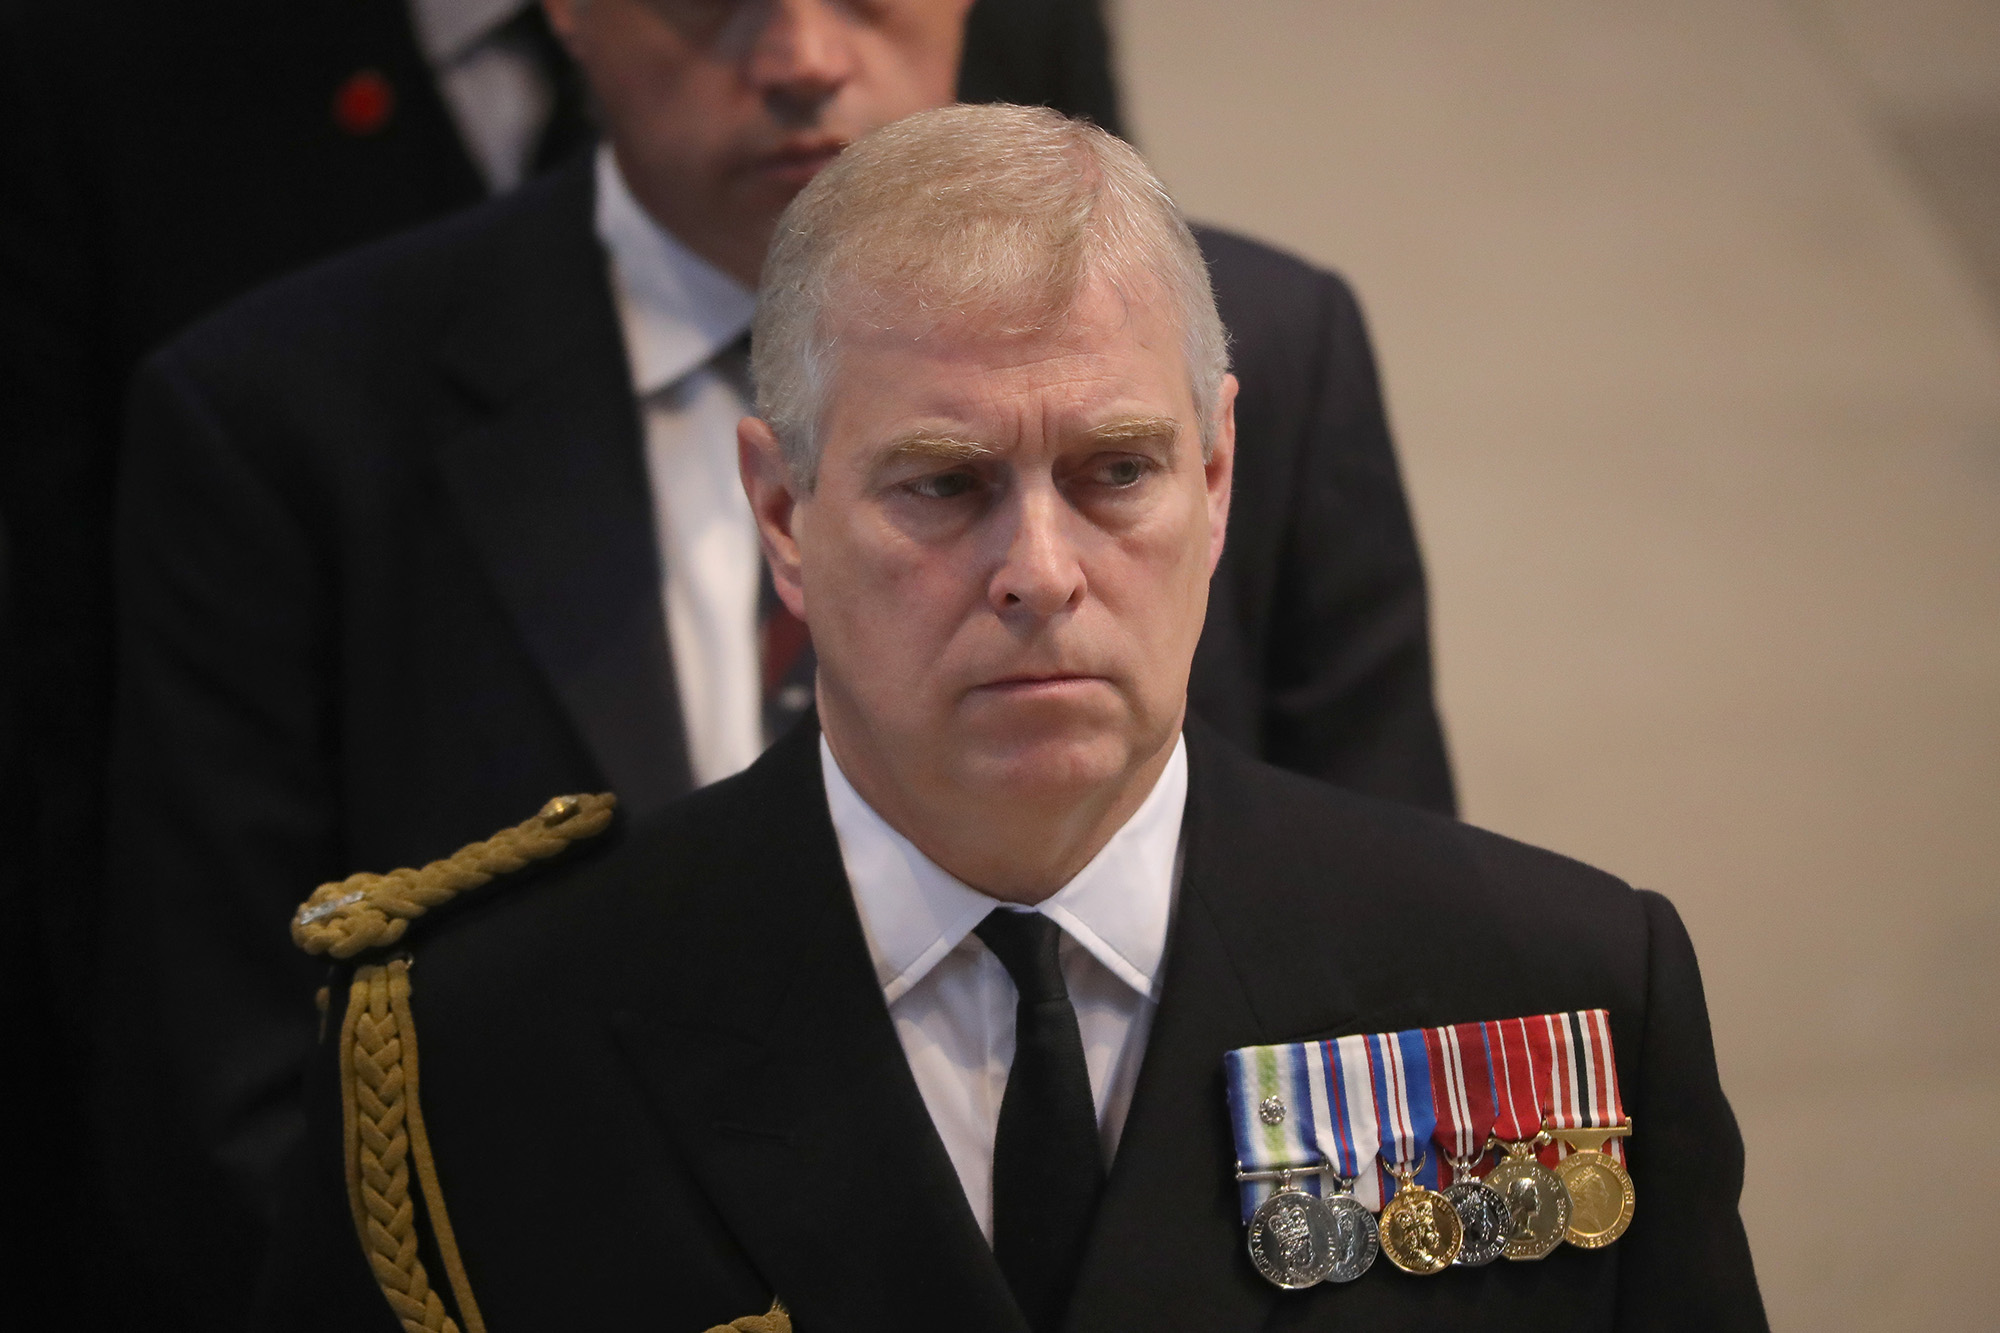 The public relations catastrophe for the Duke of York will be “reimagined” as part of the musical.